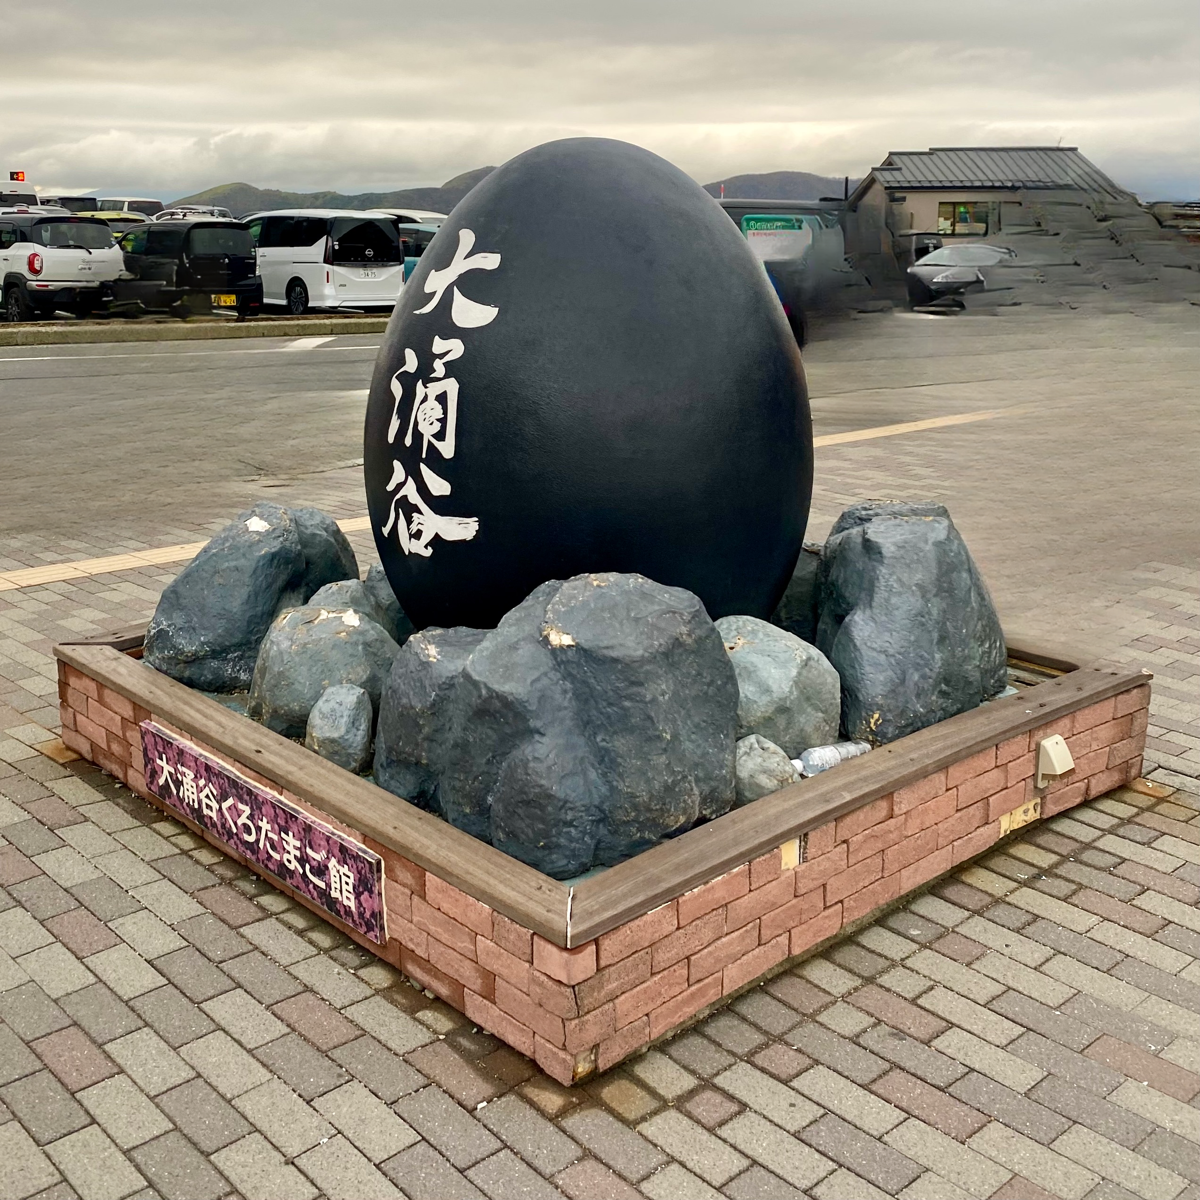 a large black egg with white writing on it surrounded by rocks